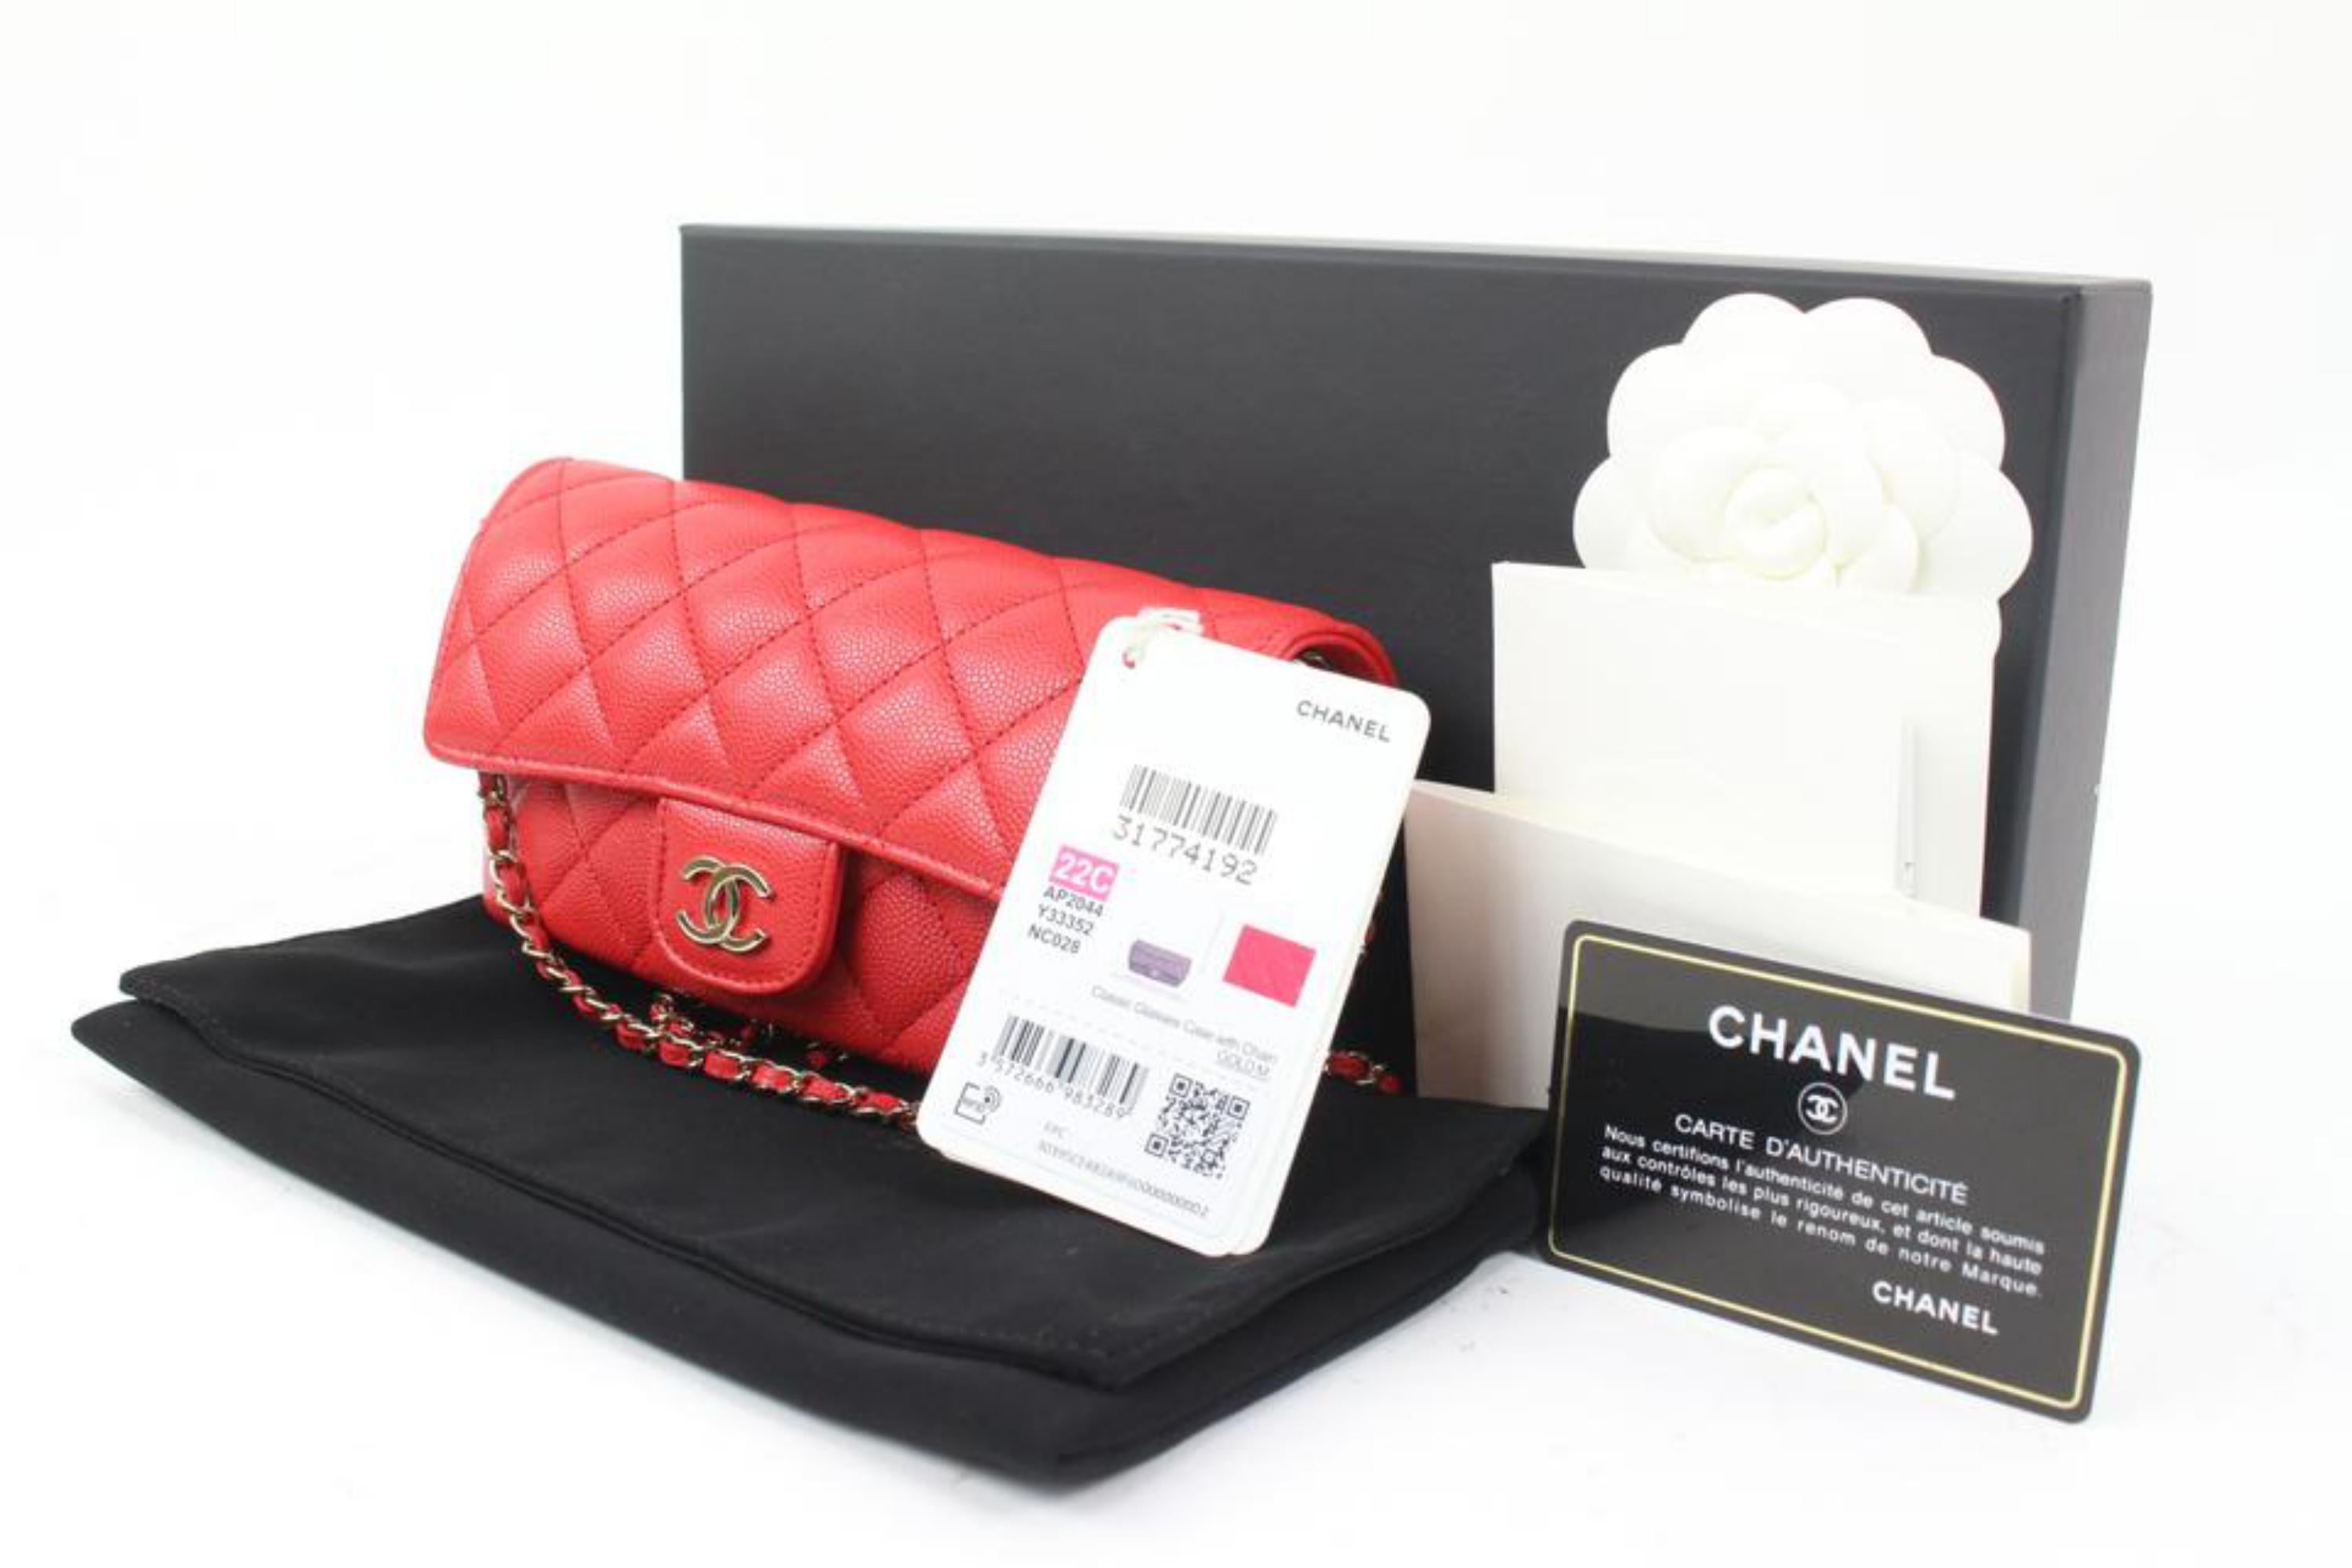 Chanel 22C Red Quilted Caviar Rectangular Mini Classic Flap Chain Bag 3ca215s
This is a Limited Flap in the Shape of a Sunglasses Case

Date Code/Serial Number: 31774192
Made In: France
Measurements: Length:  7